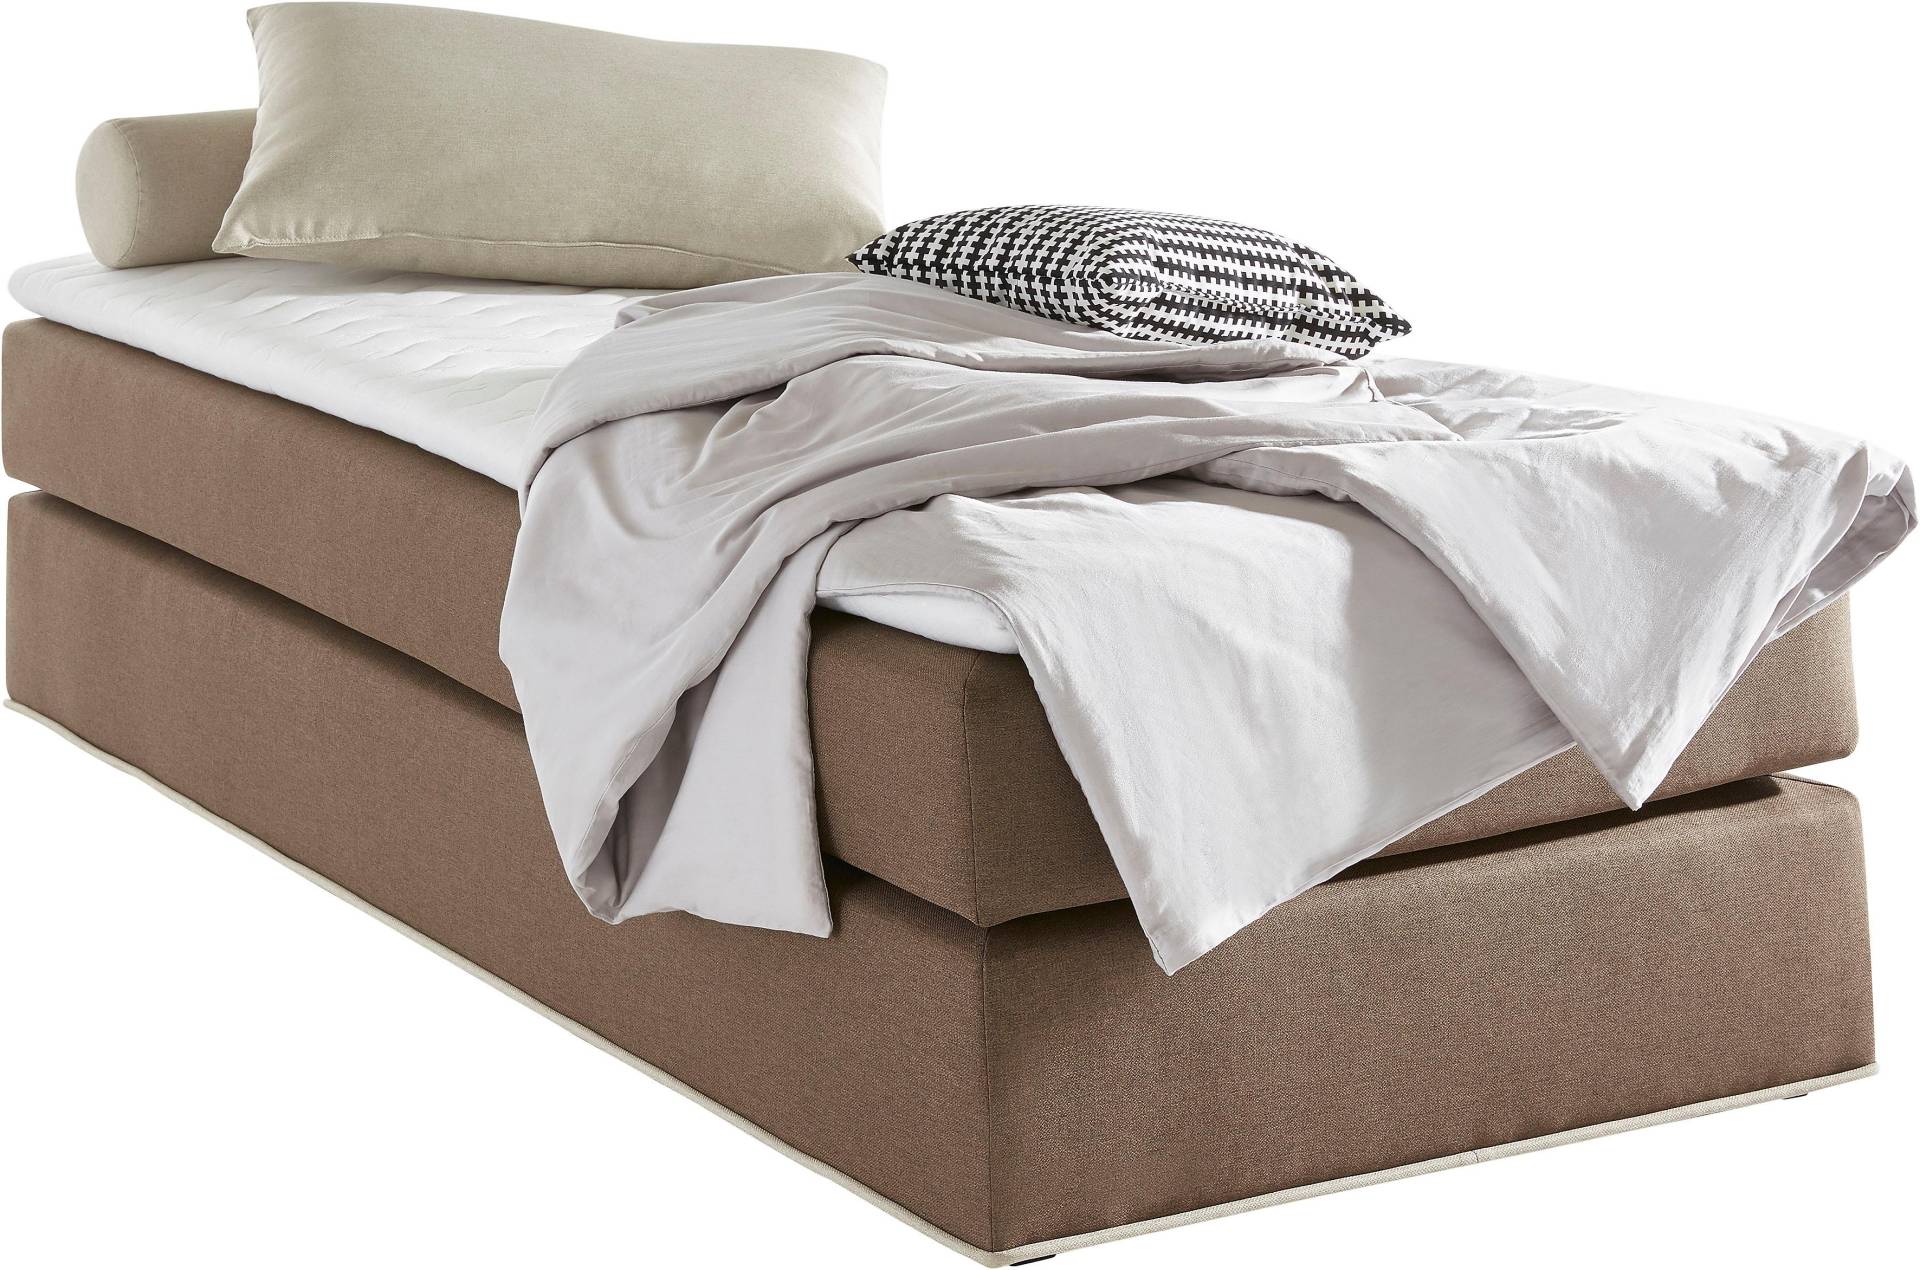 COLLECTION AB Boxspringbett, inklusive Topper von COLLECTION AB